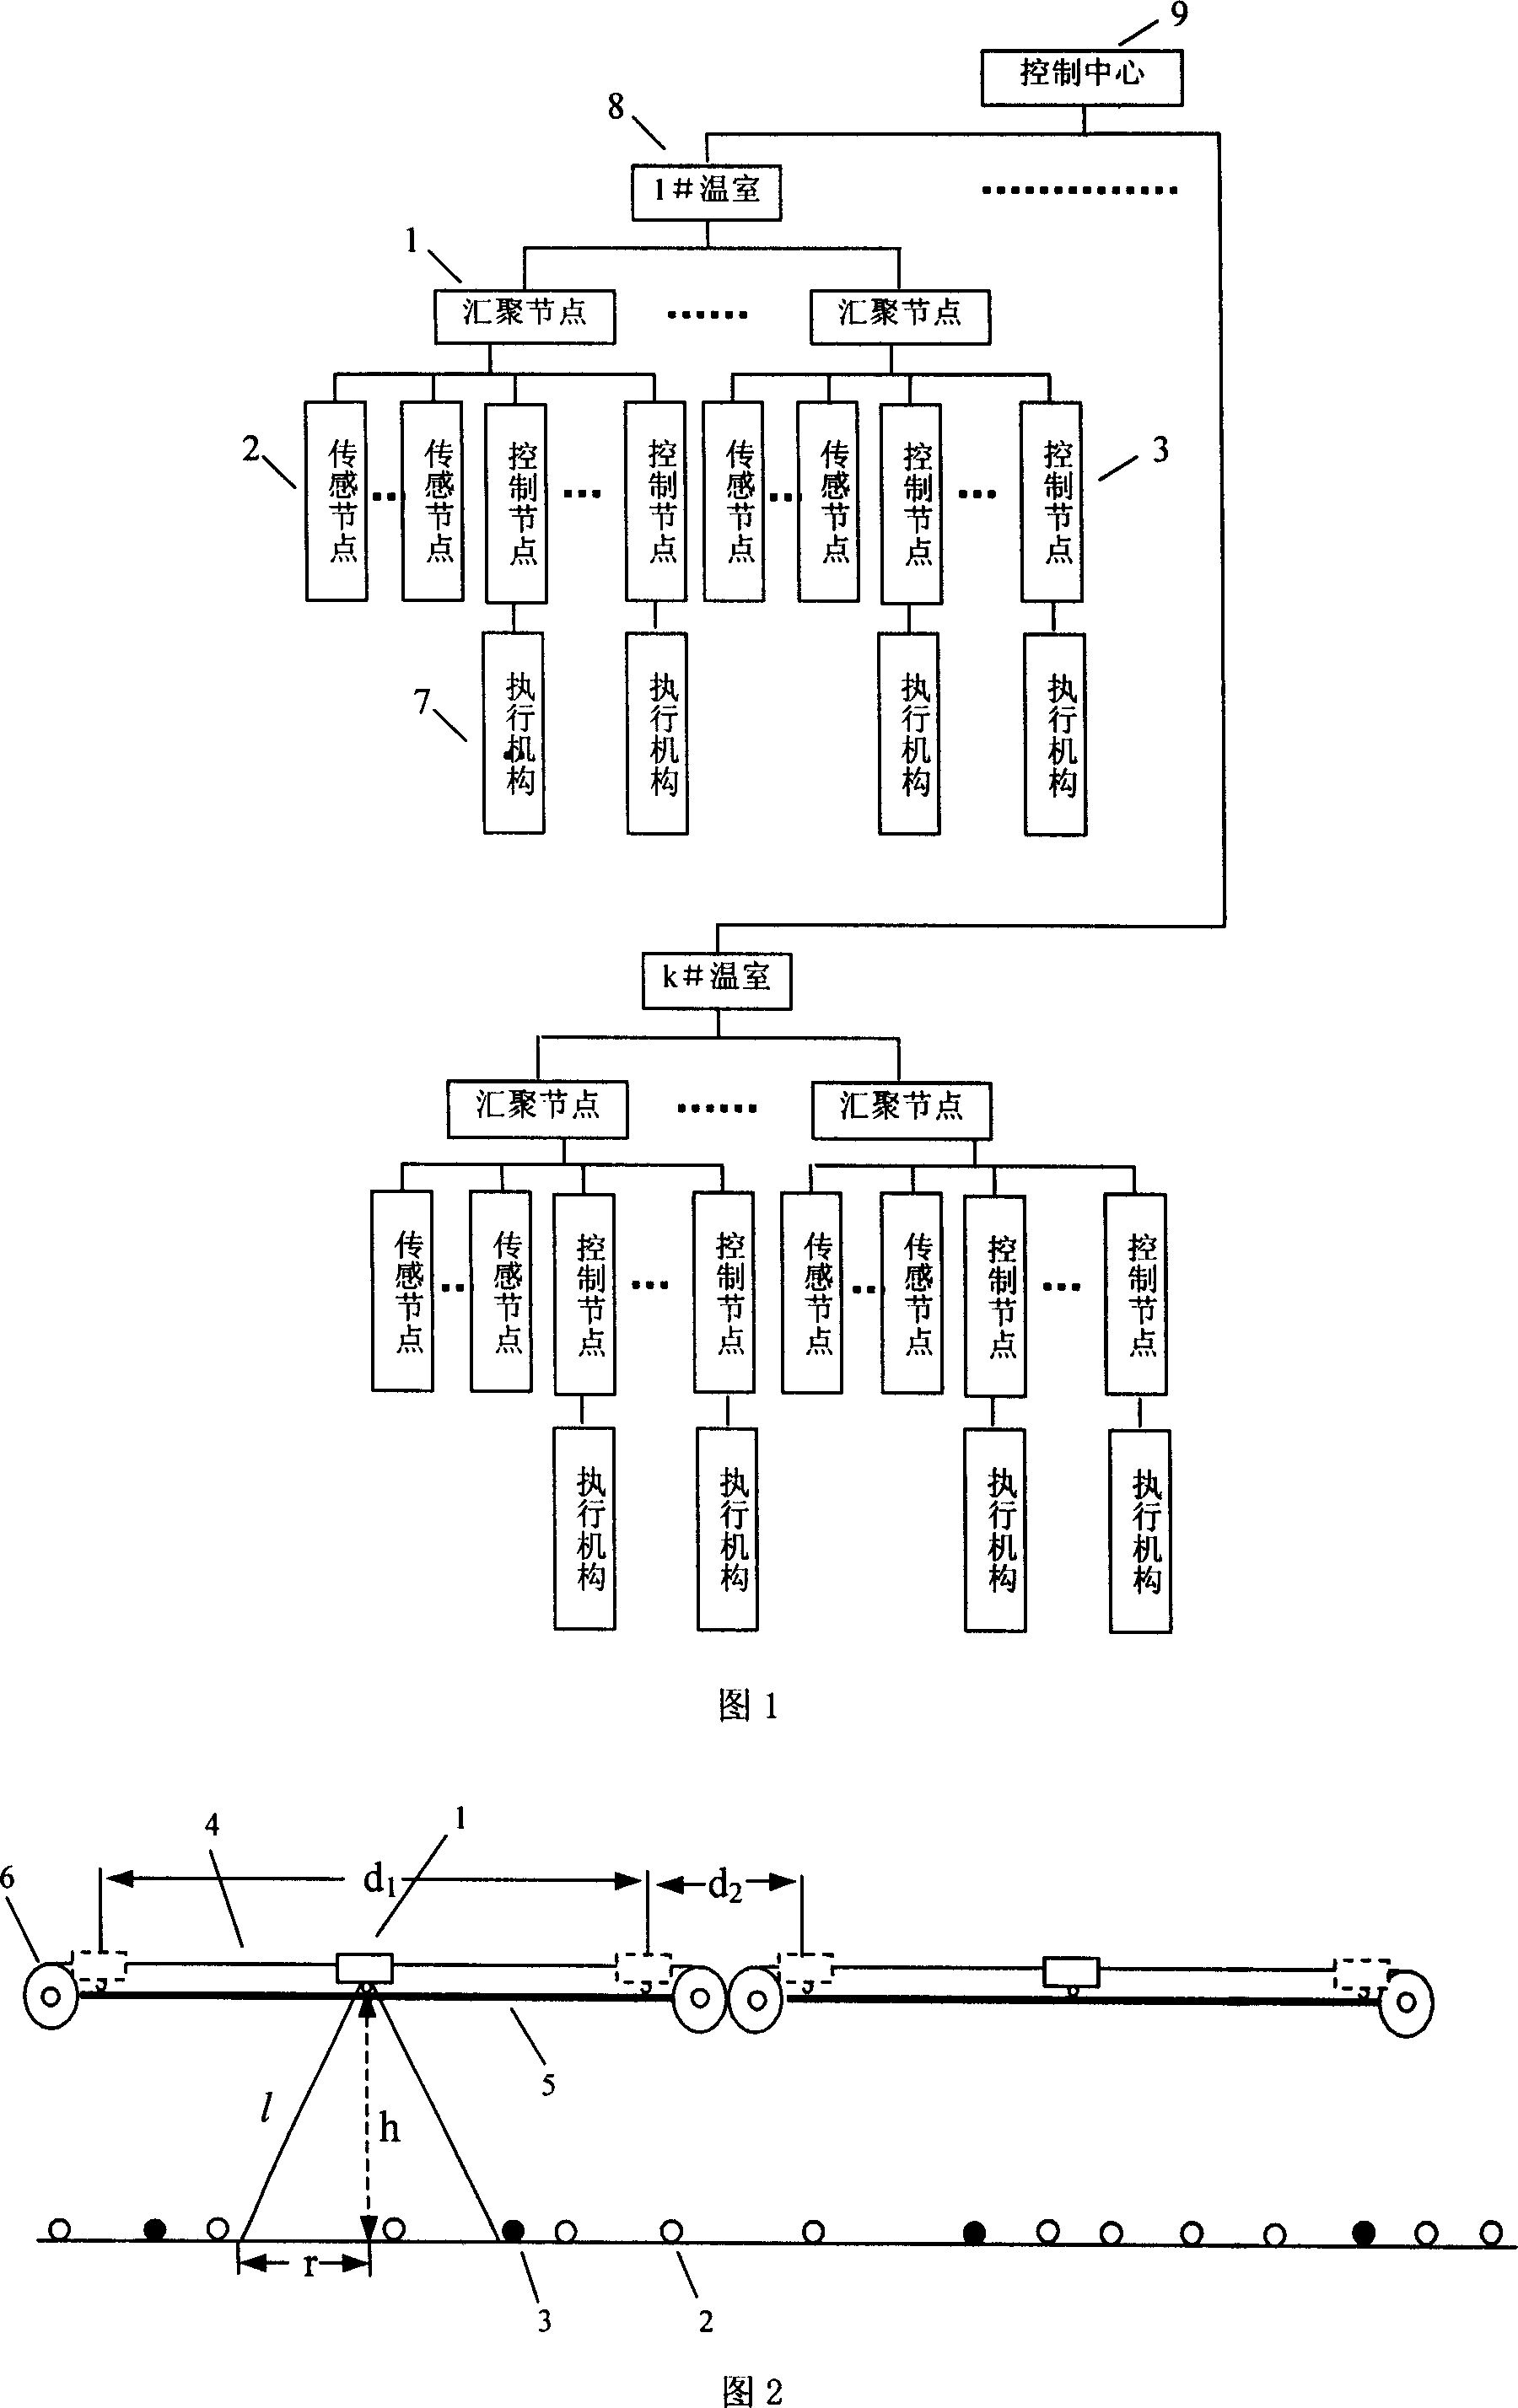 Green house varying structural self-organizing radio sensor network and constituting method